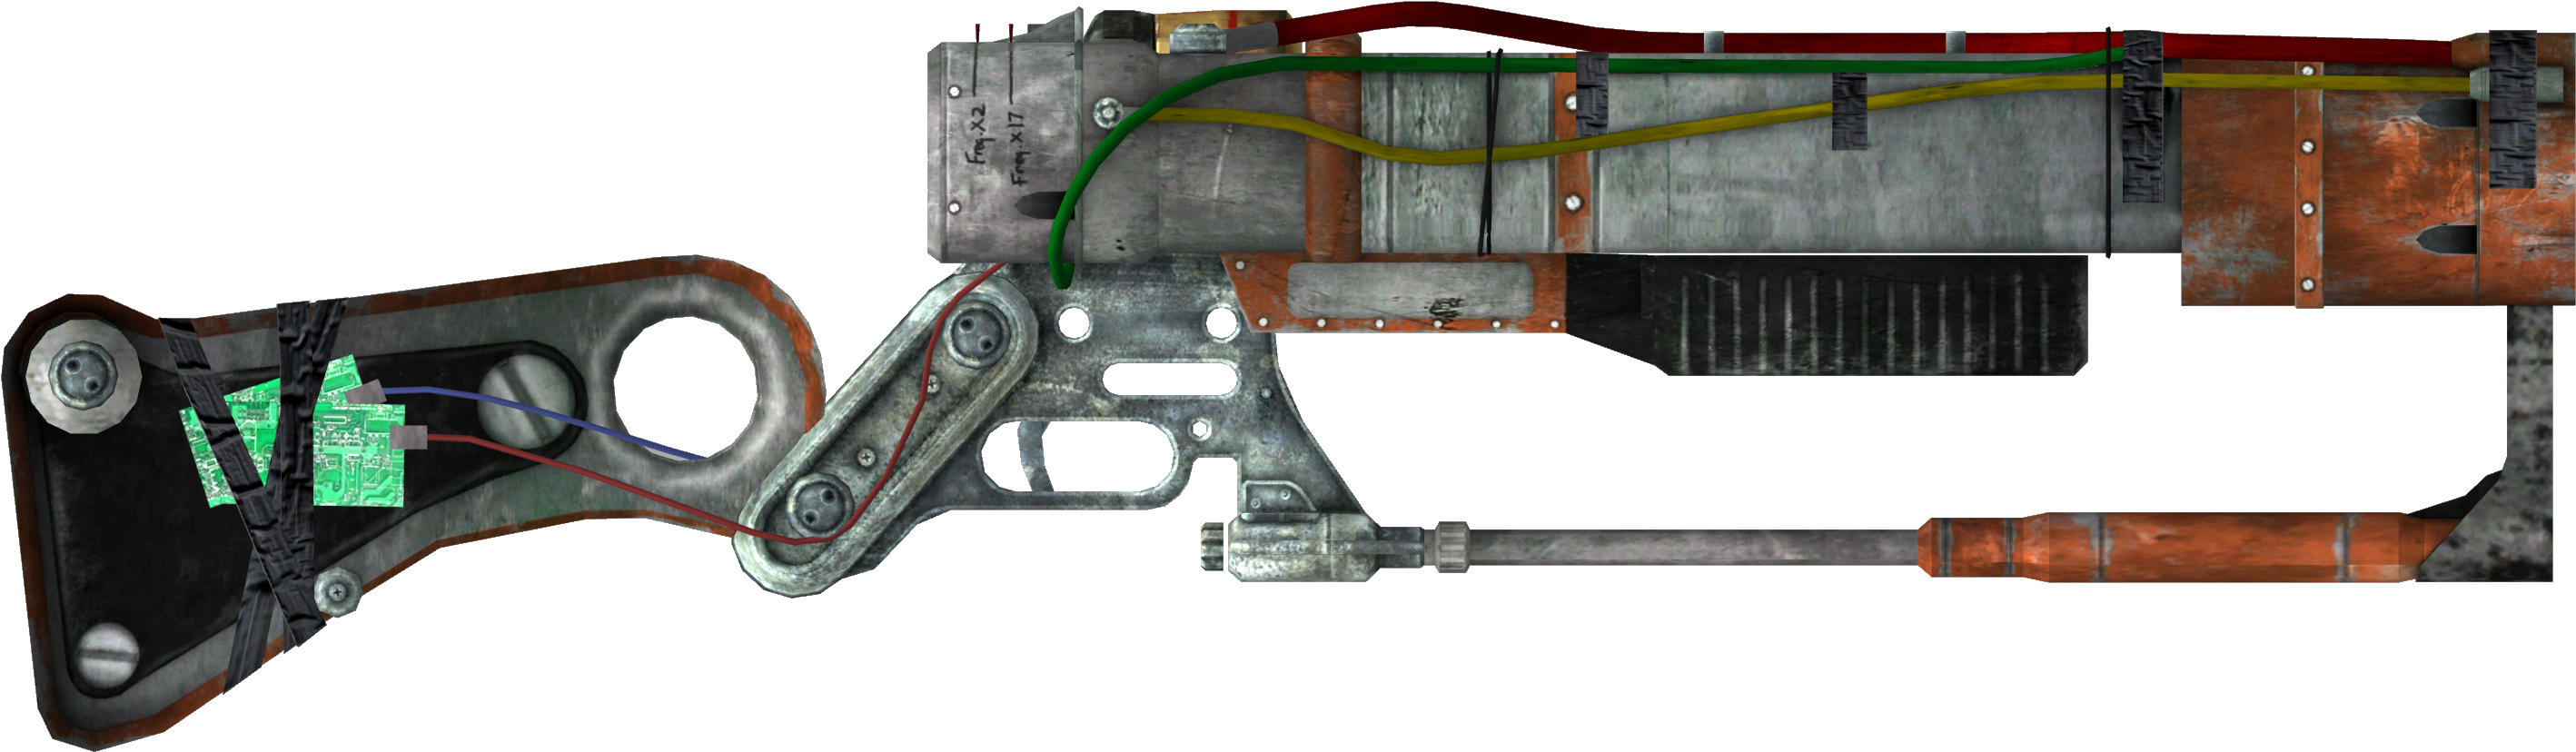 61 Mb Png - Fallout 3 Laser Rifle (2950x950), Png Download